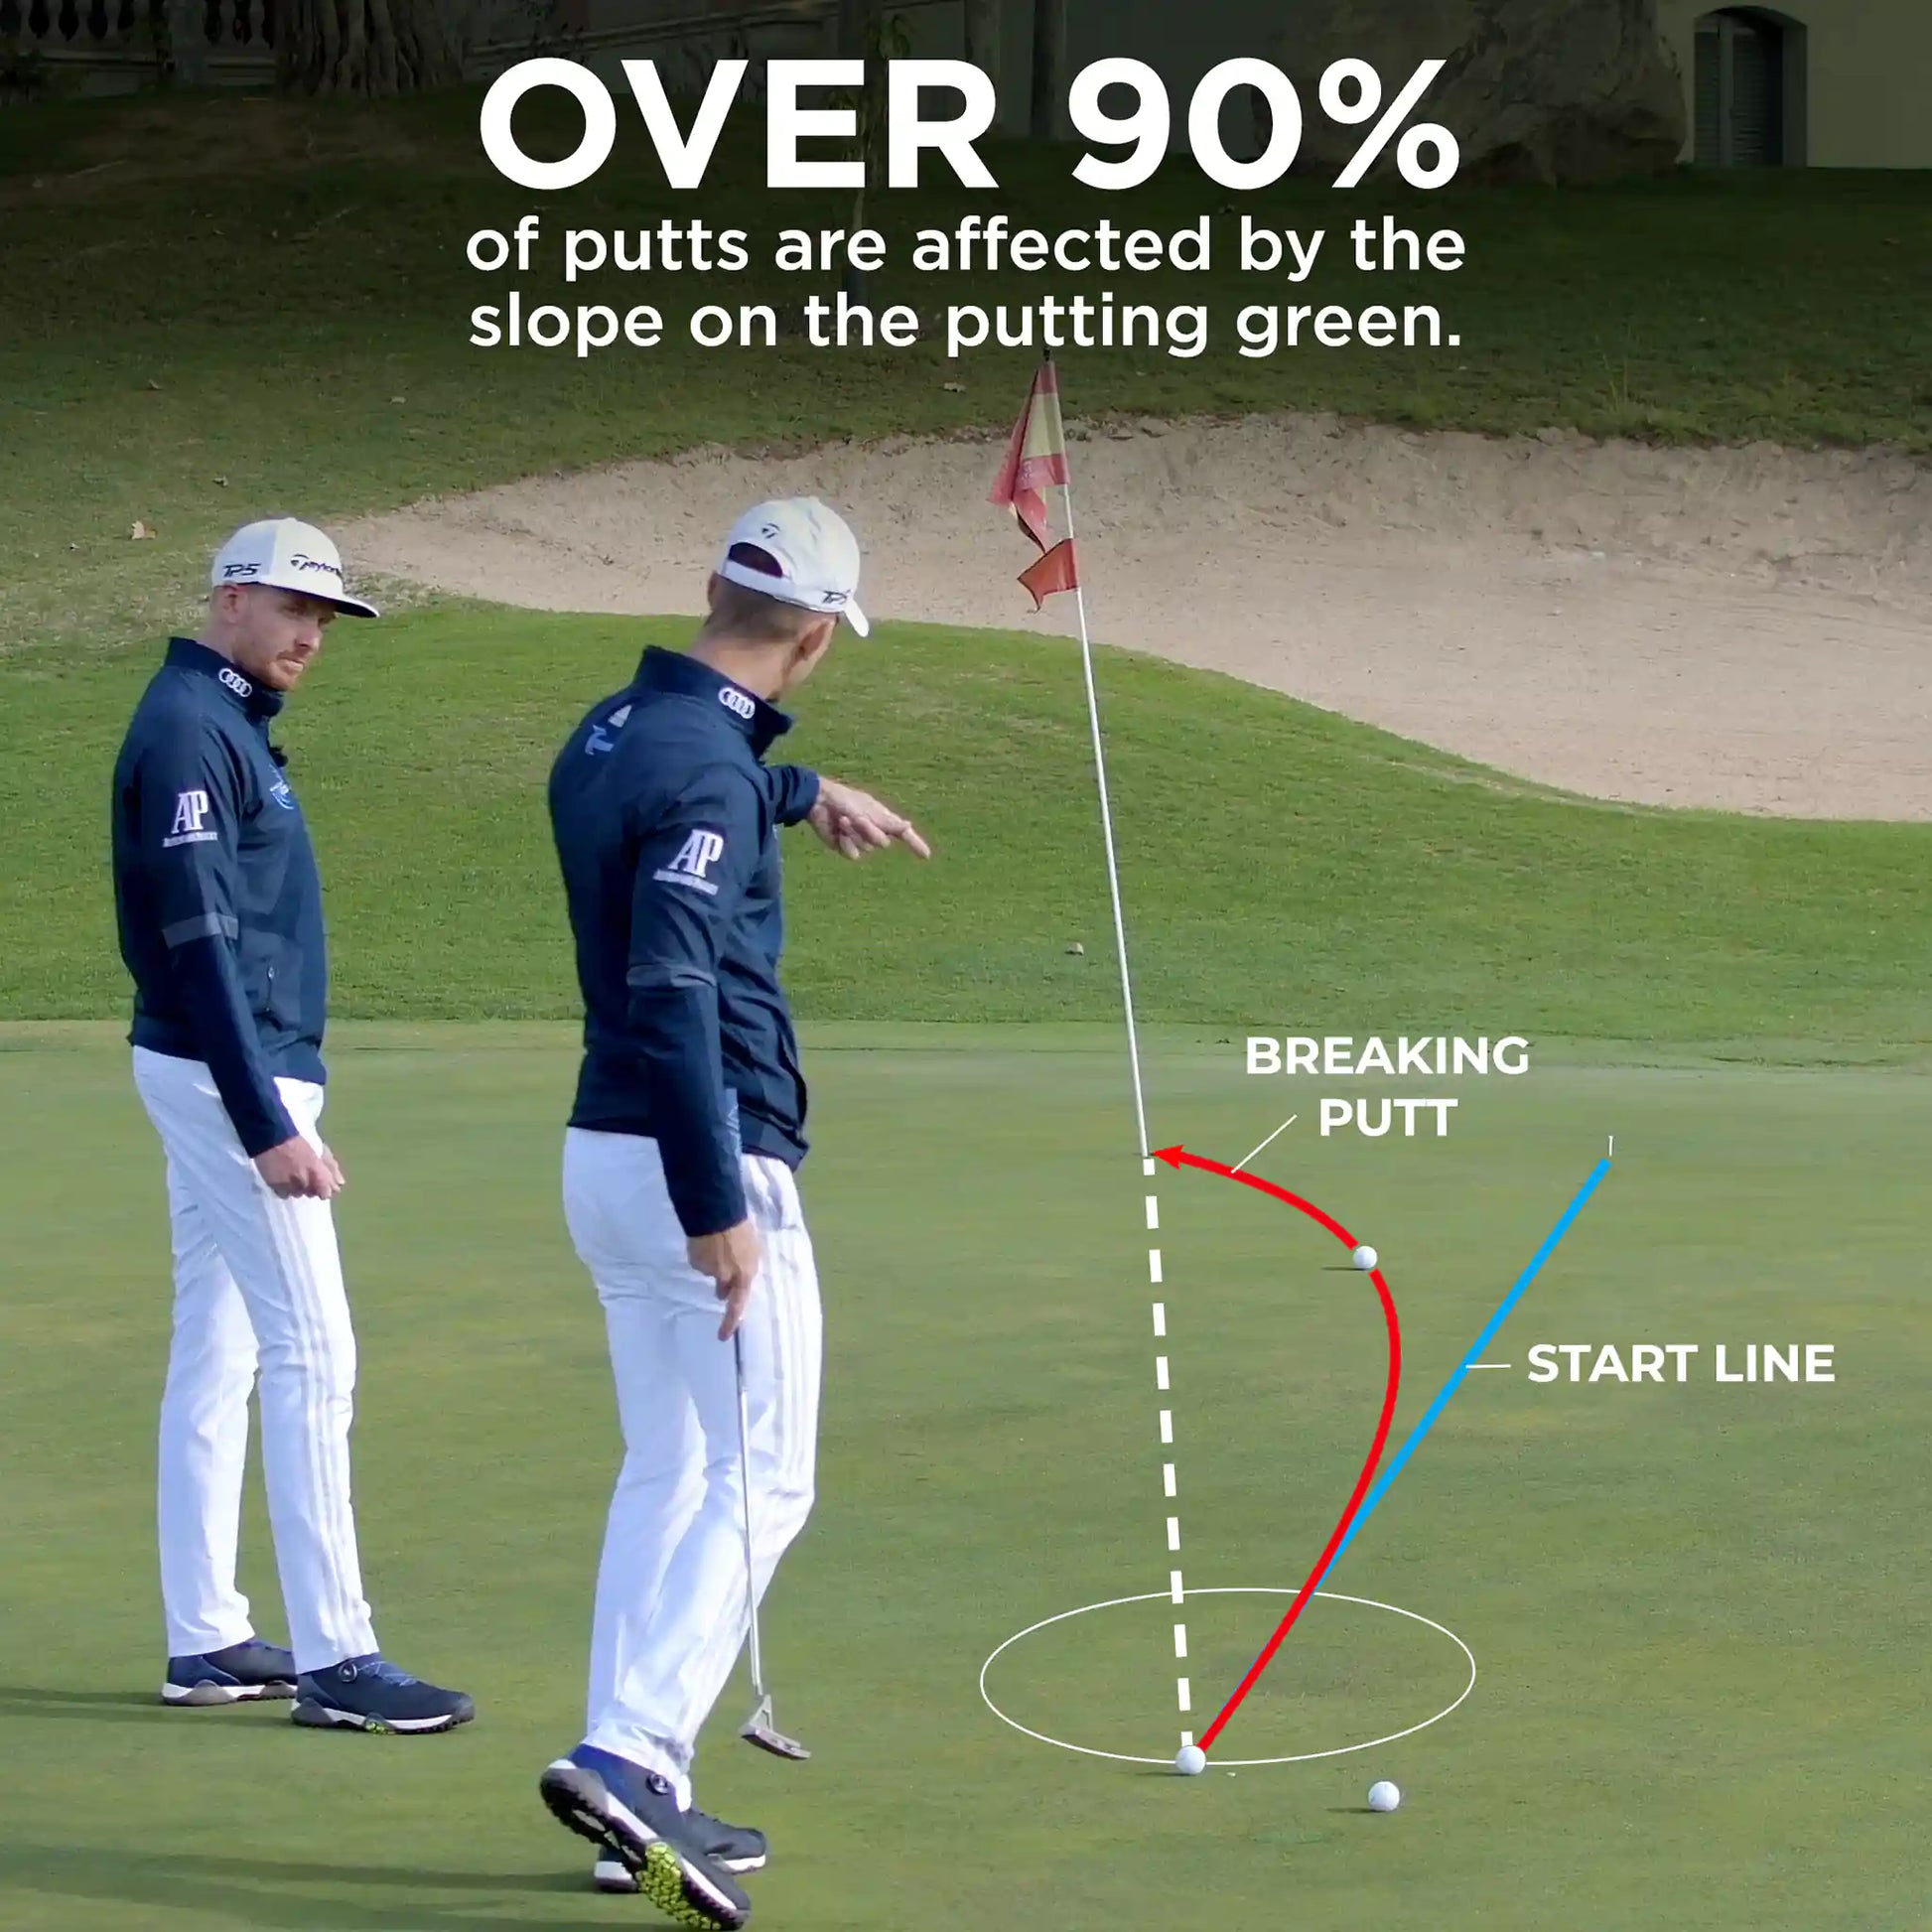 90% of putts are breaking putts